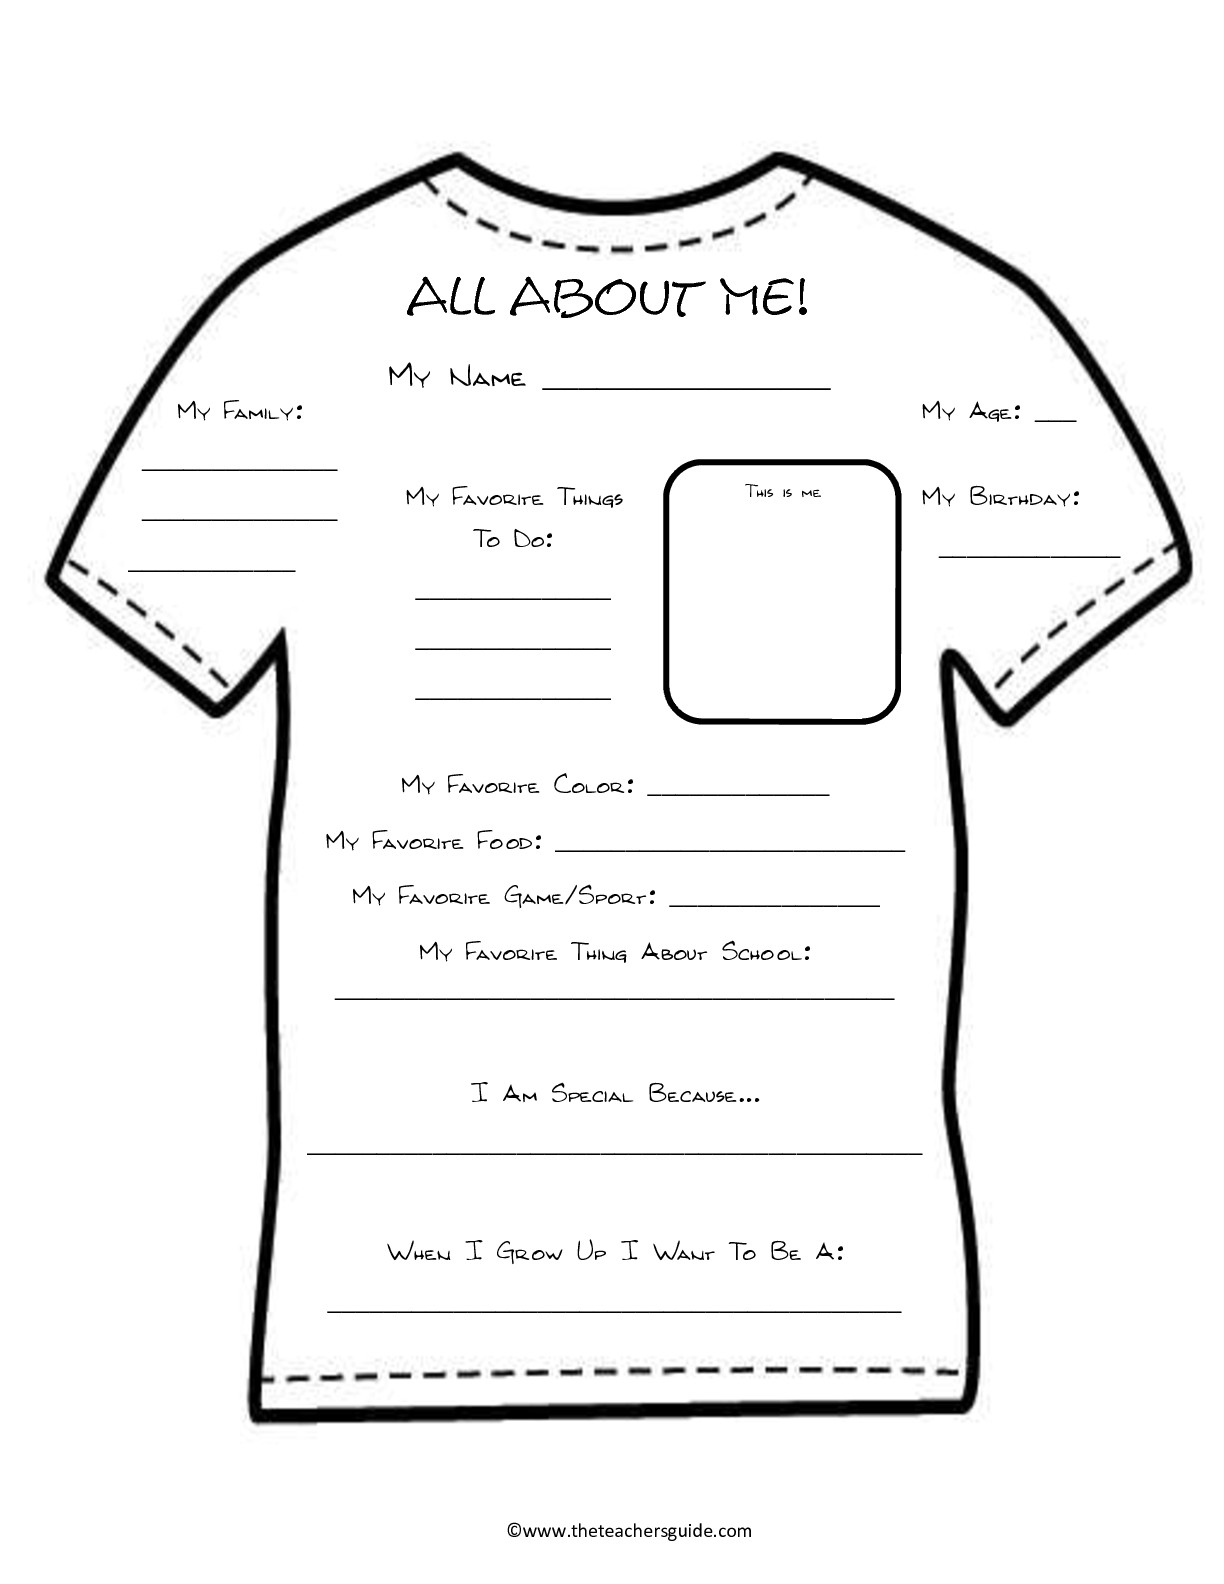 About Me Worksheet Middle School Free Printable